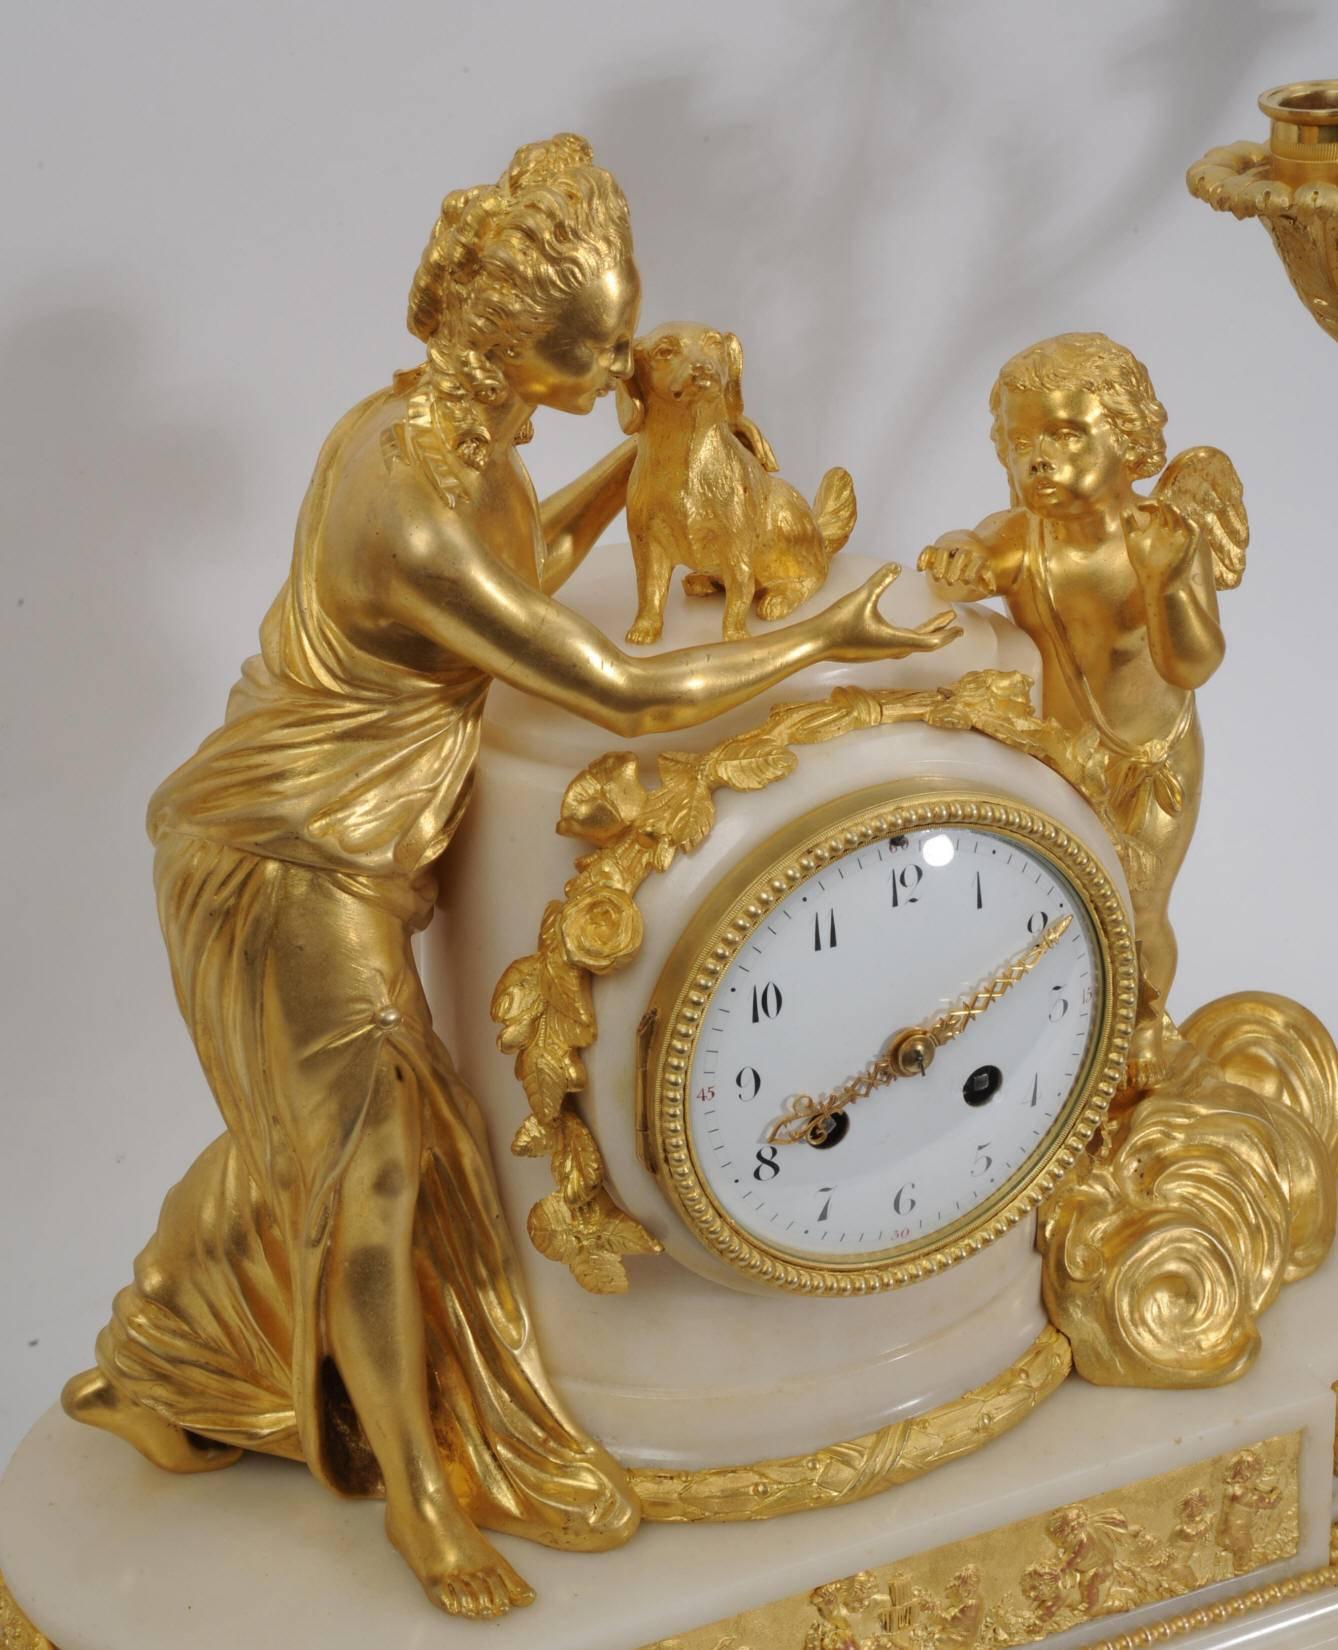 A large and exceptional original antique French ormolu and marble Louis XVI style clock set. The beautiful young Venus stands with a small dog, a symbol of fidelity. Amour is represented in the heavens by a putto standing amongst the gilded clouds.